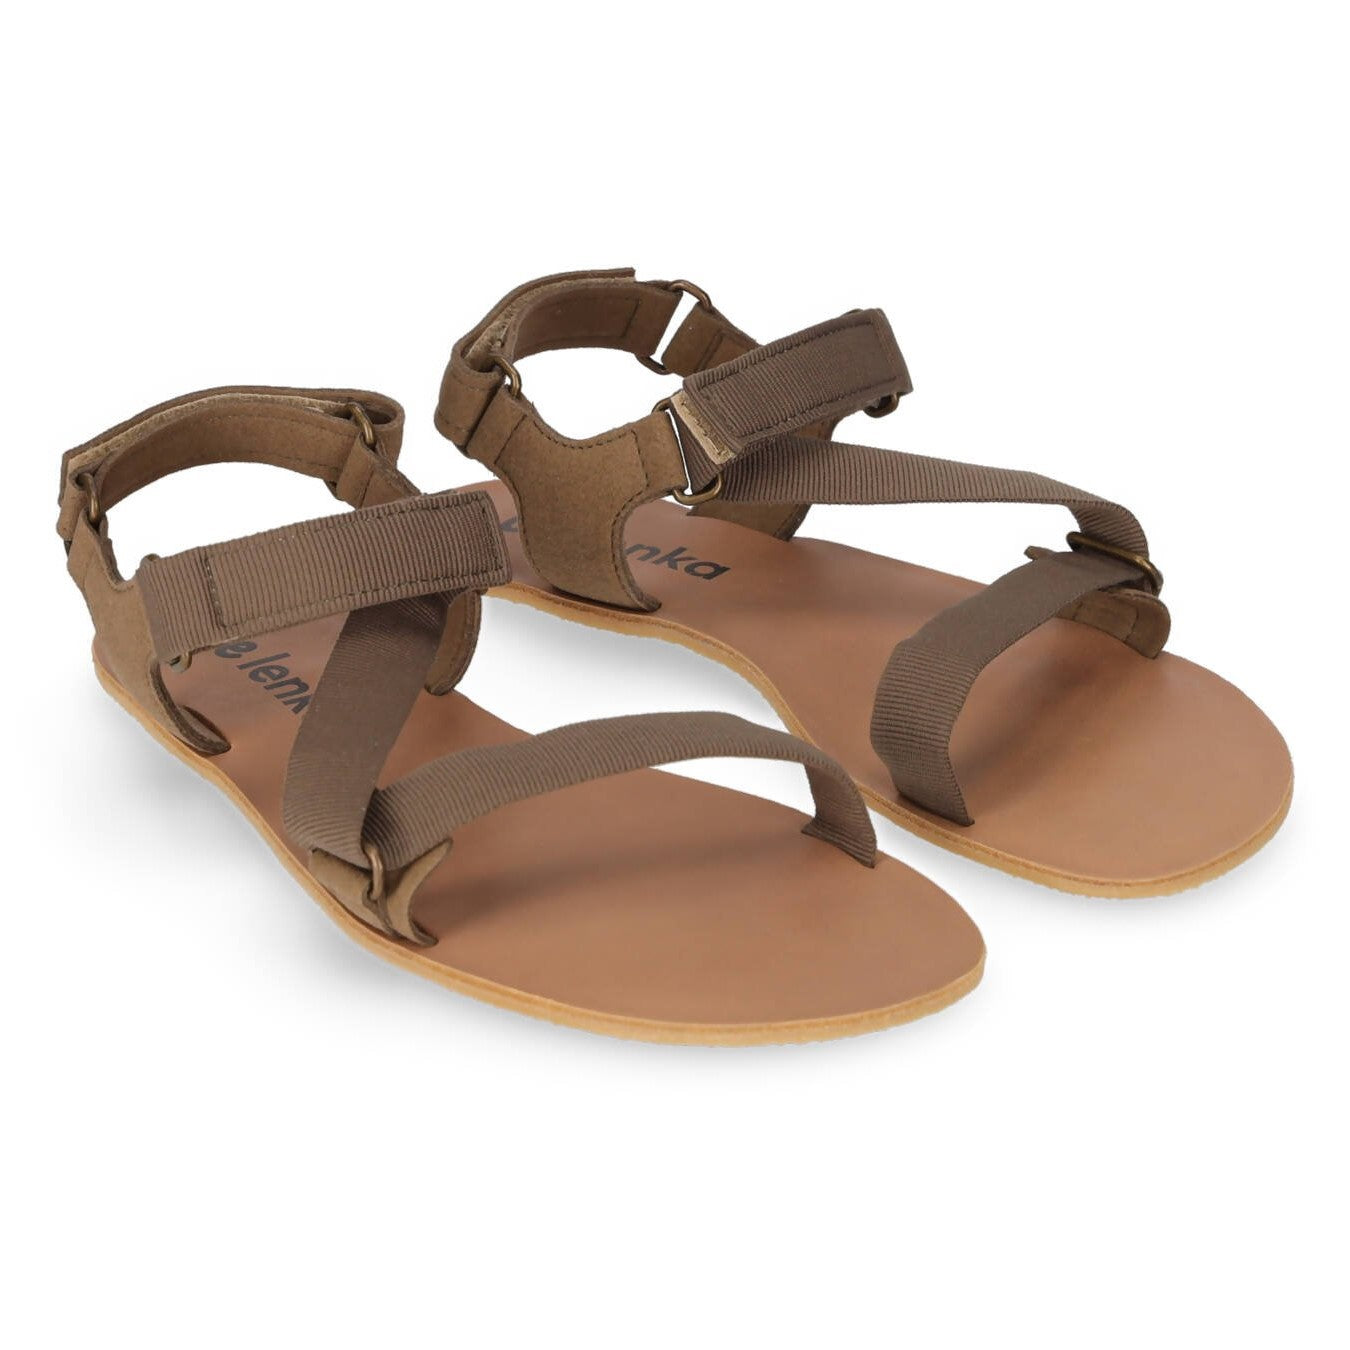 A photo of Olive Green Be Lenka Flexi Sandals made with fabric straps with velcro and a tan leather topped rubber soles. The sandals have straps that cross the front of the foot and continue around the mid-foot, ankle, and heel. Both sandals are shown facing diagonally right against a white background. #color_olive-green